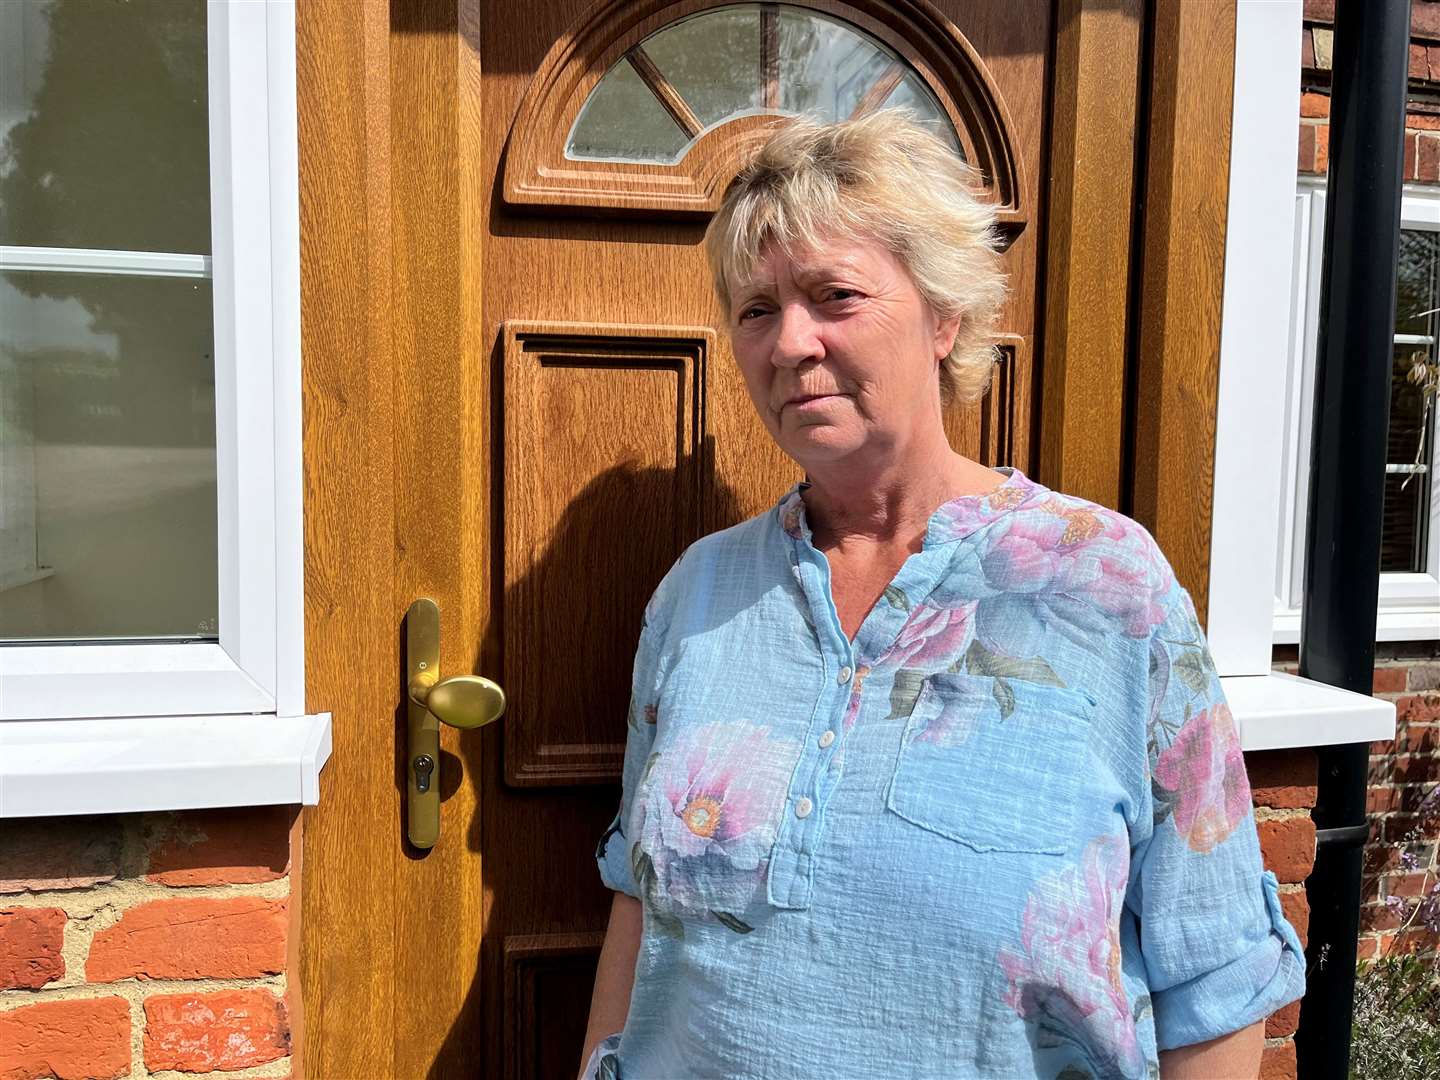 Jayne Marney, 68, from Ashford, believes she was conned out of £1,600 by a rogue locksmith